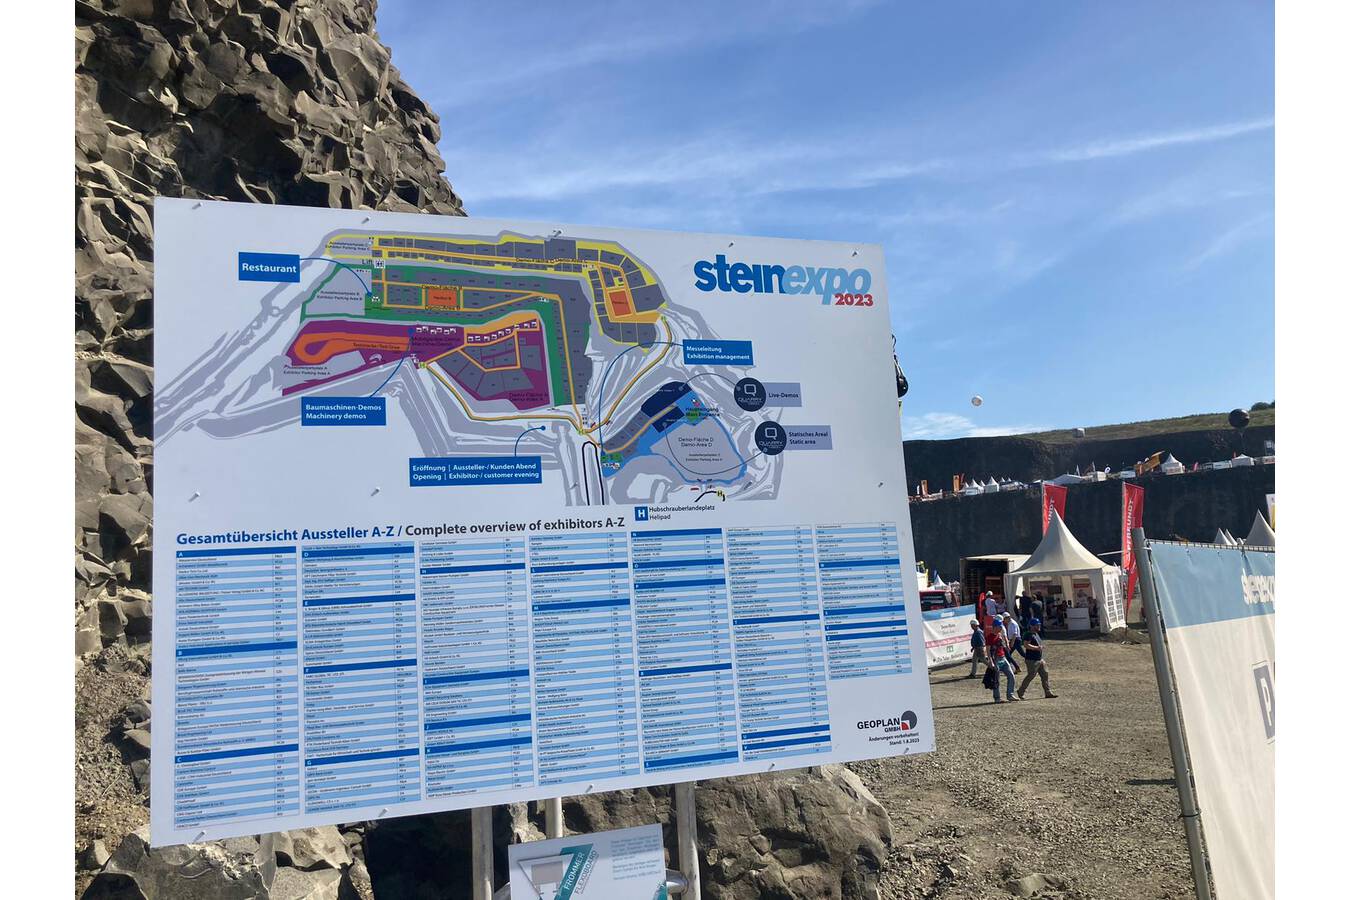 ScrapeTec Showcases Innovations at Steinexpo Niederofleiden, September 2023 - Steinexpo, one of the most significant exhibitions in the construction materials and natural stone sector, opens its doors to industry professionals from around the world. 